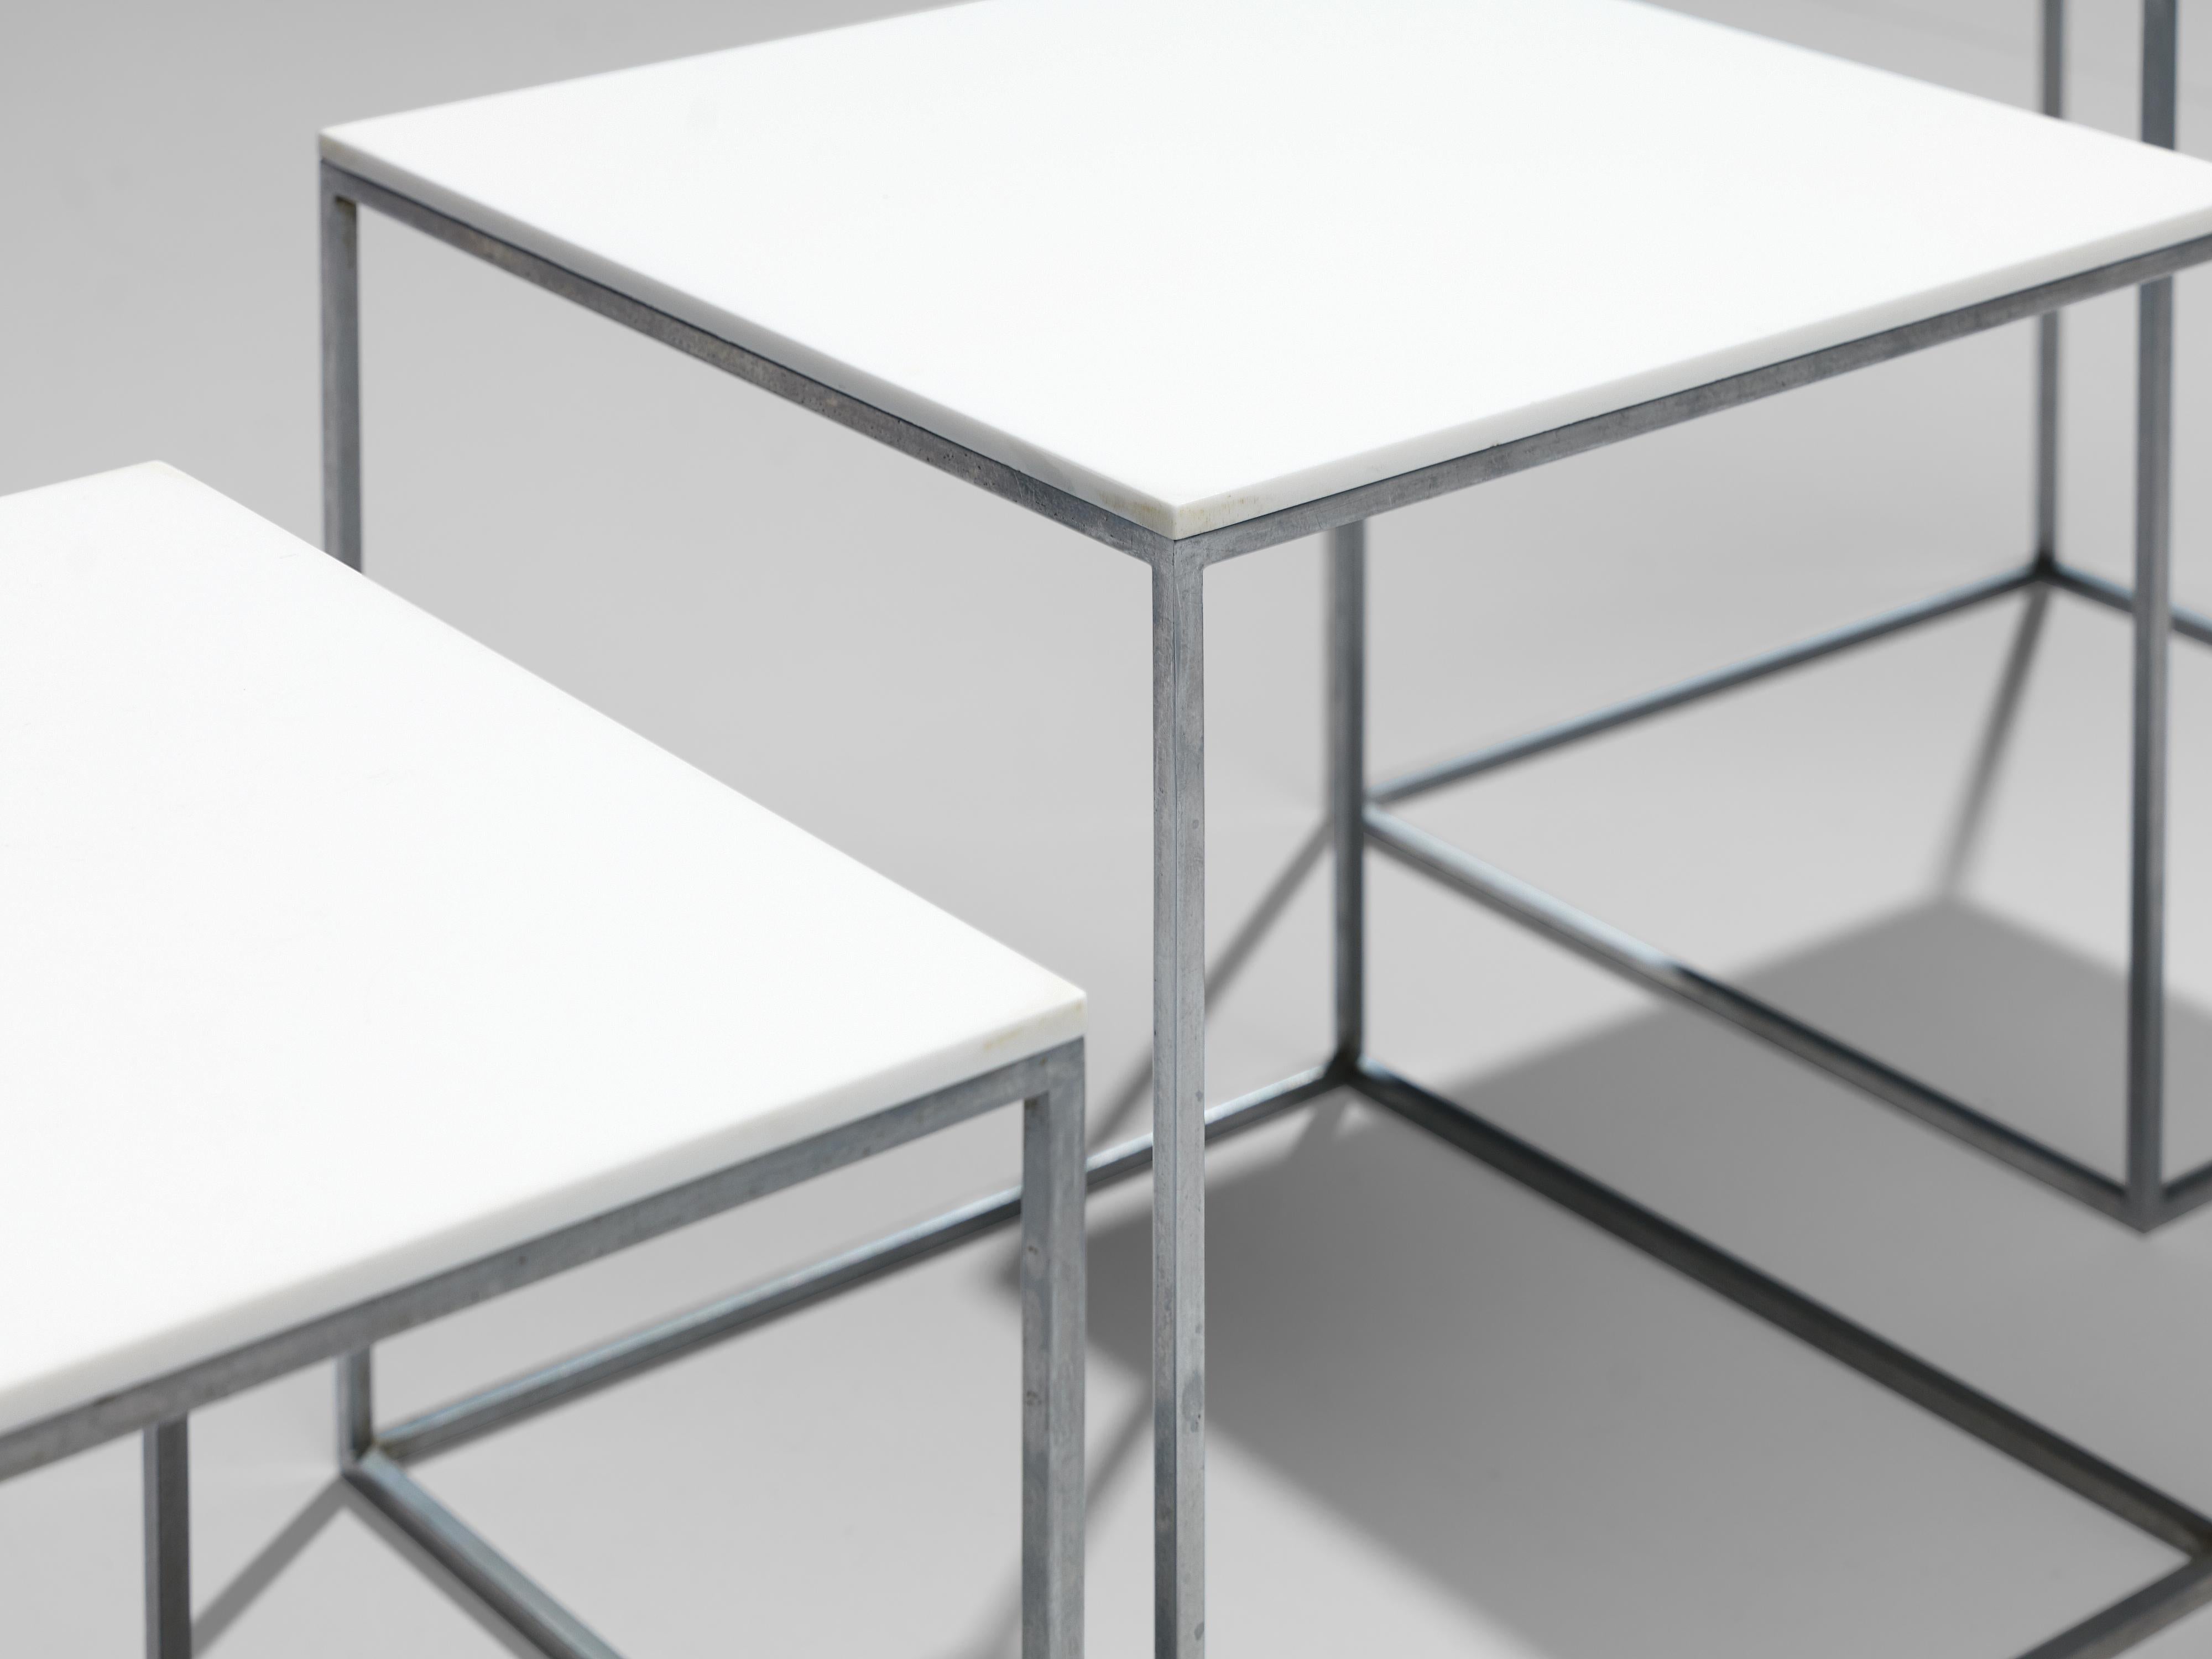 Mid-20th Century Poul Kjaerholm Set of Nesting Tables in White Perspex and Steel